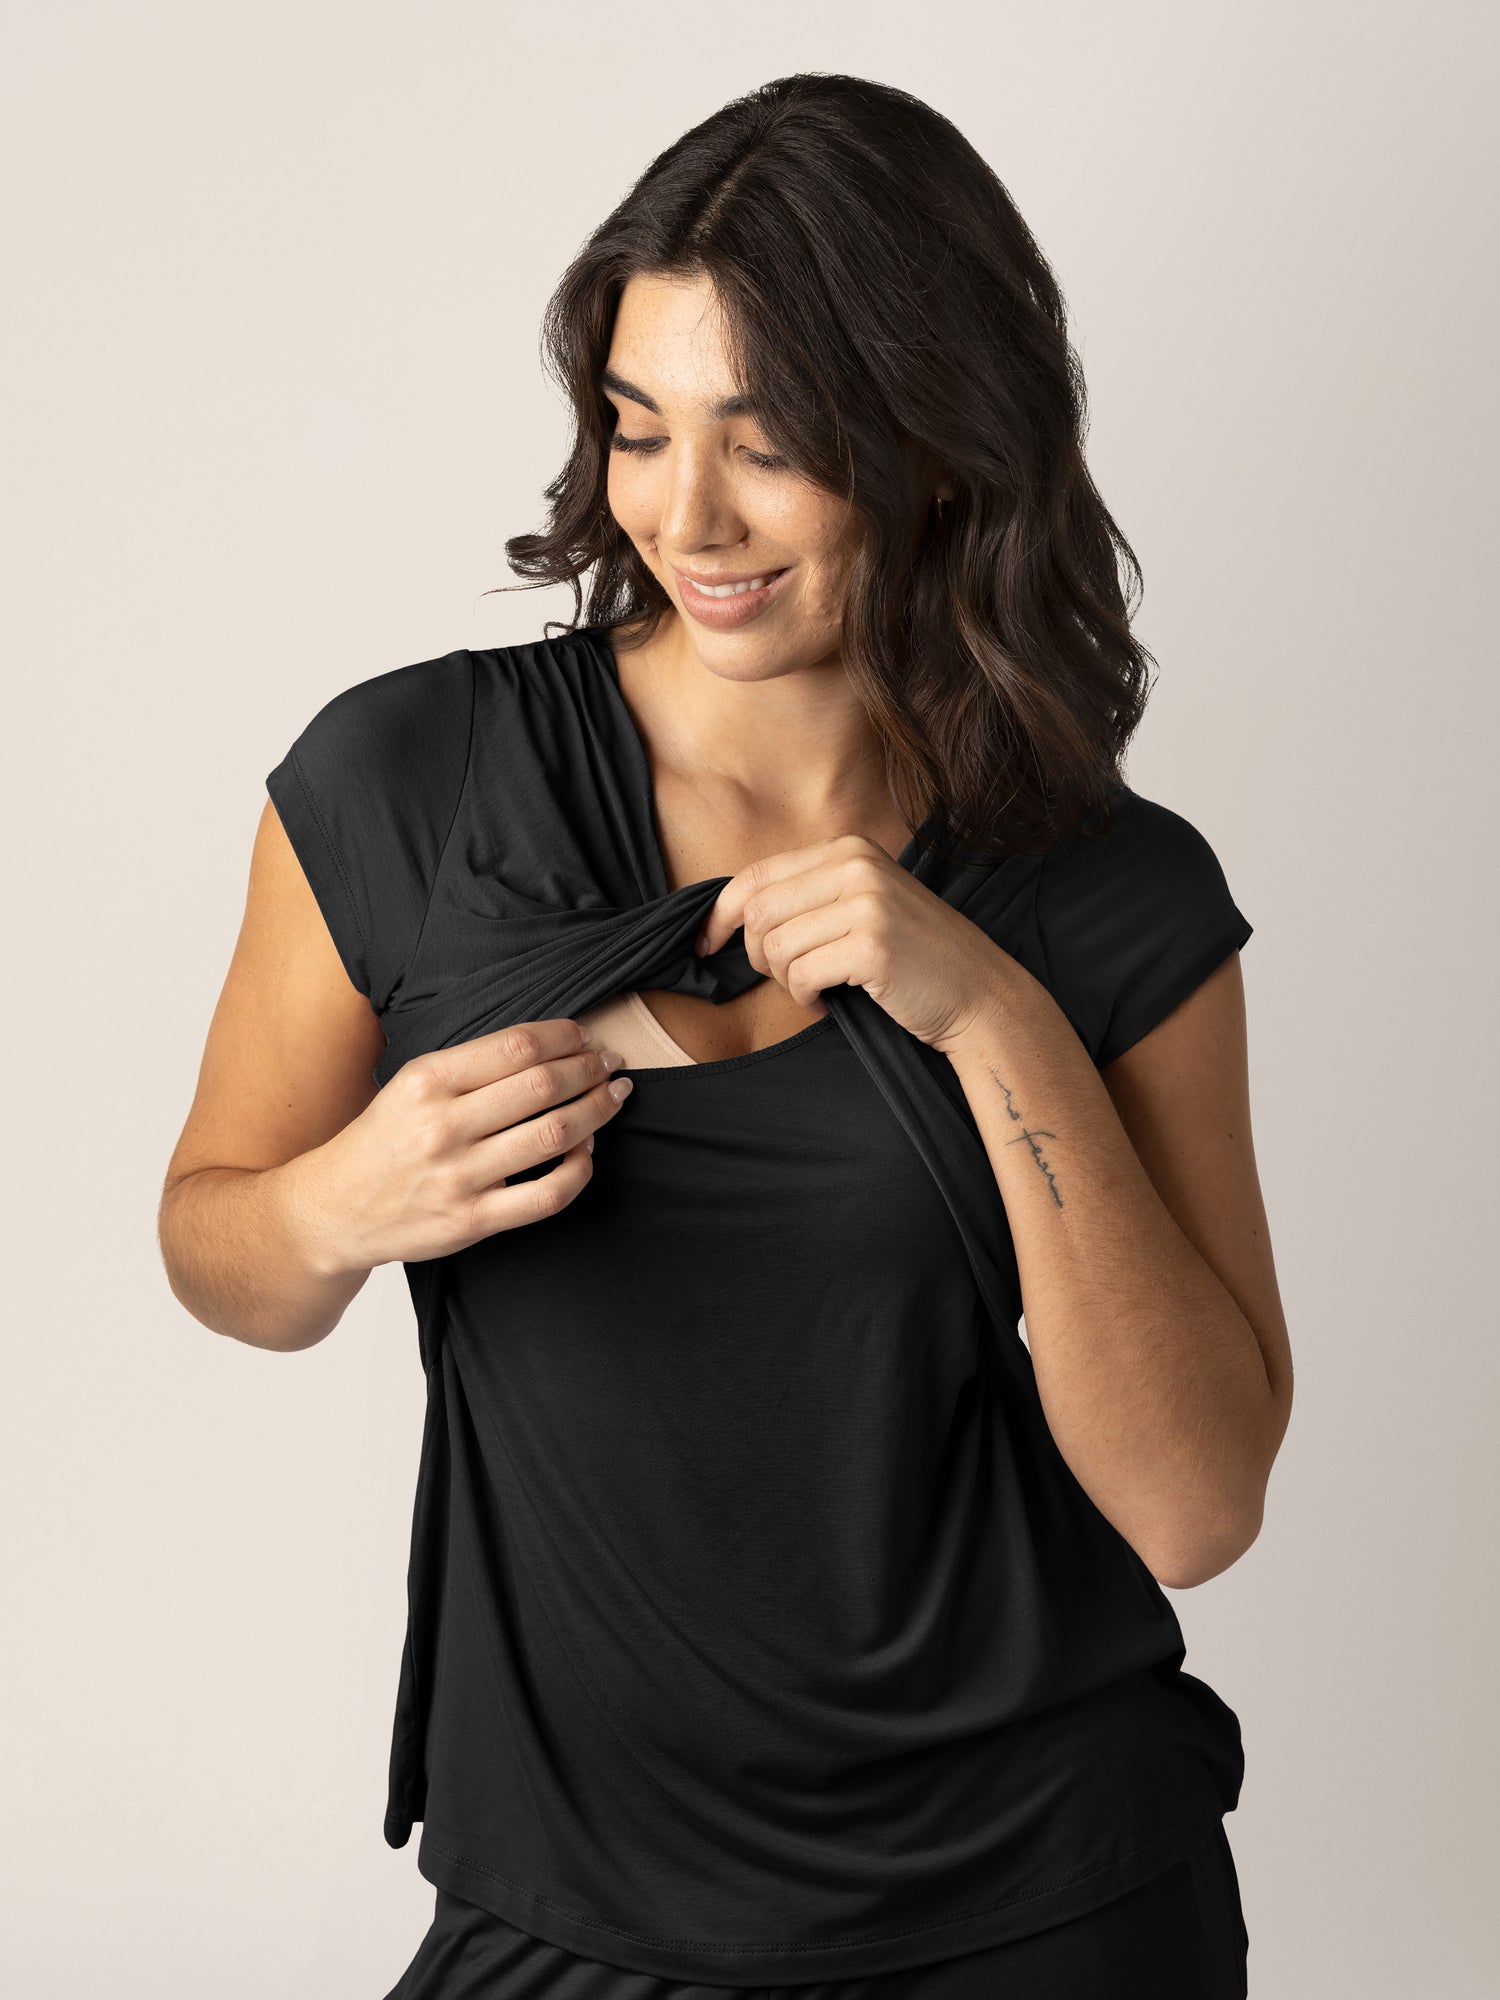 Are you in need of comfortable bras as a mom? Danya shares with